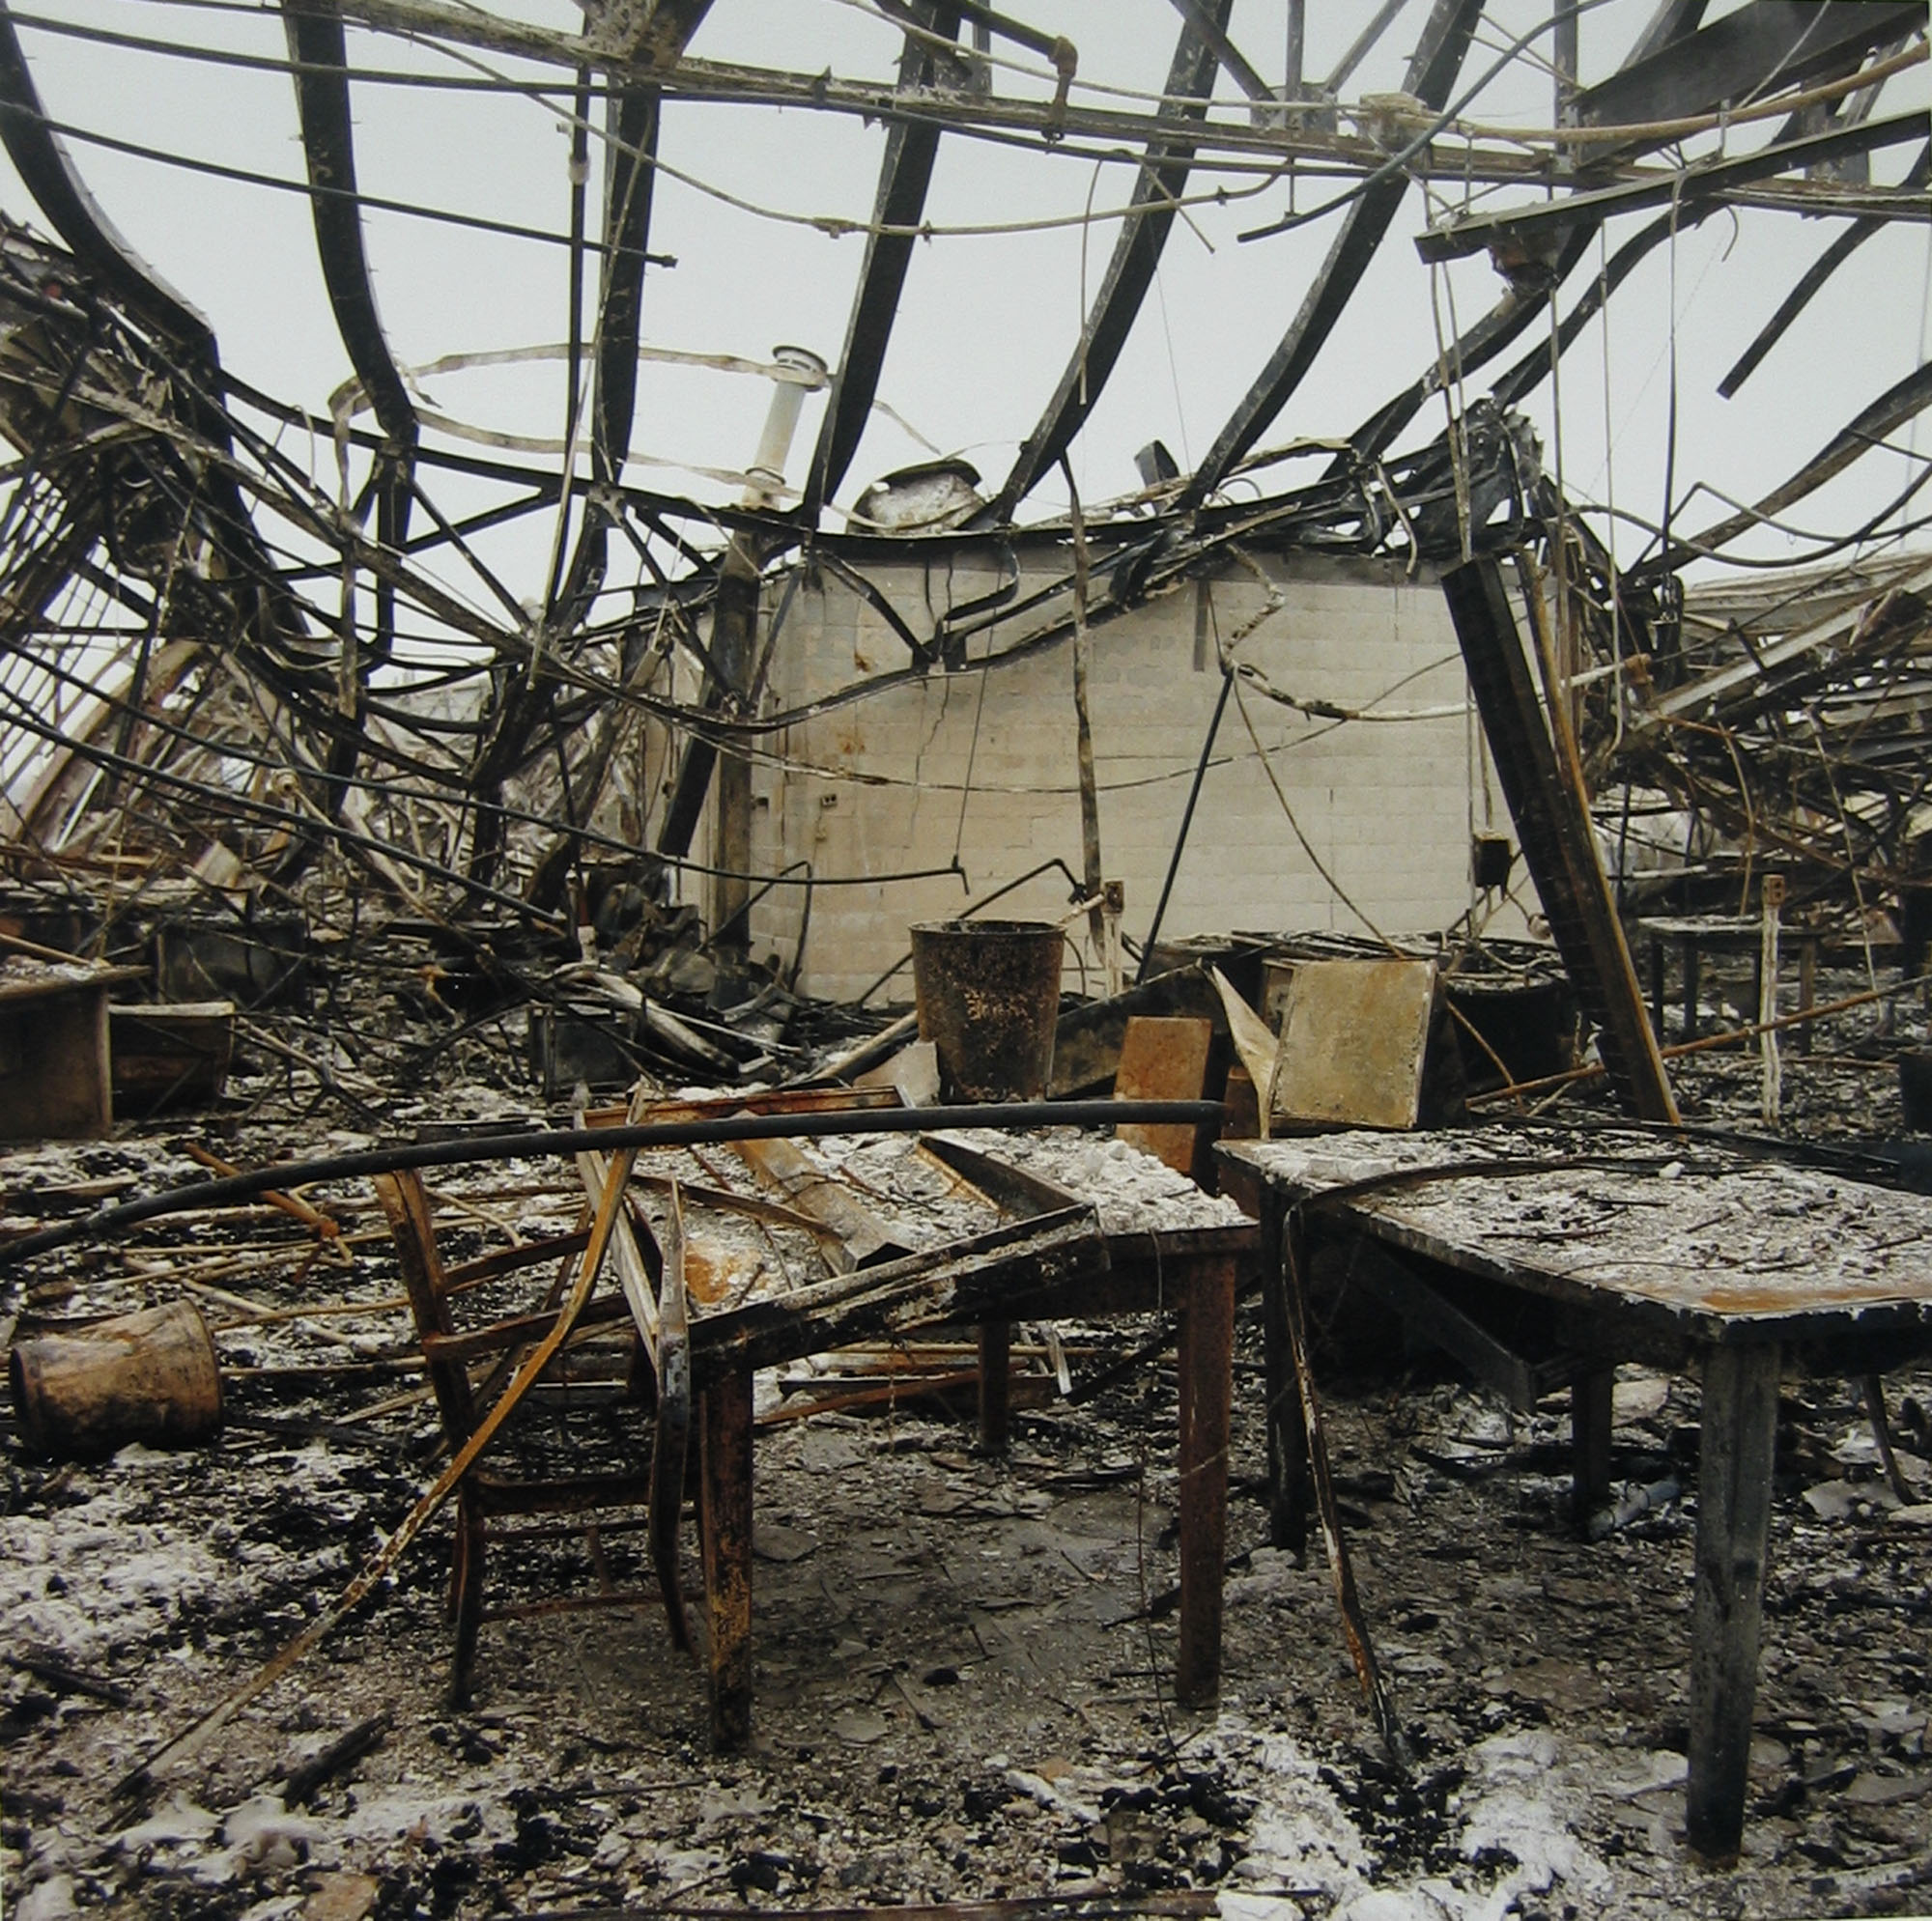 Abandoned main office building, with table and chair, destroyed in December 1995 by fire, August 1, 1996